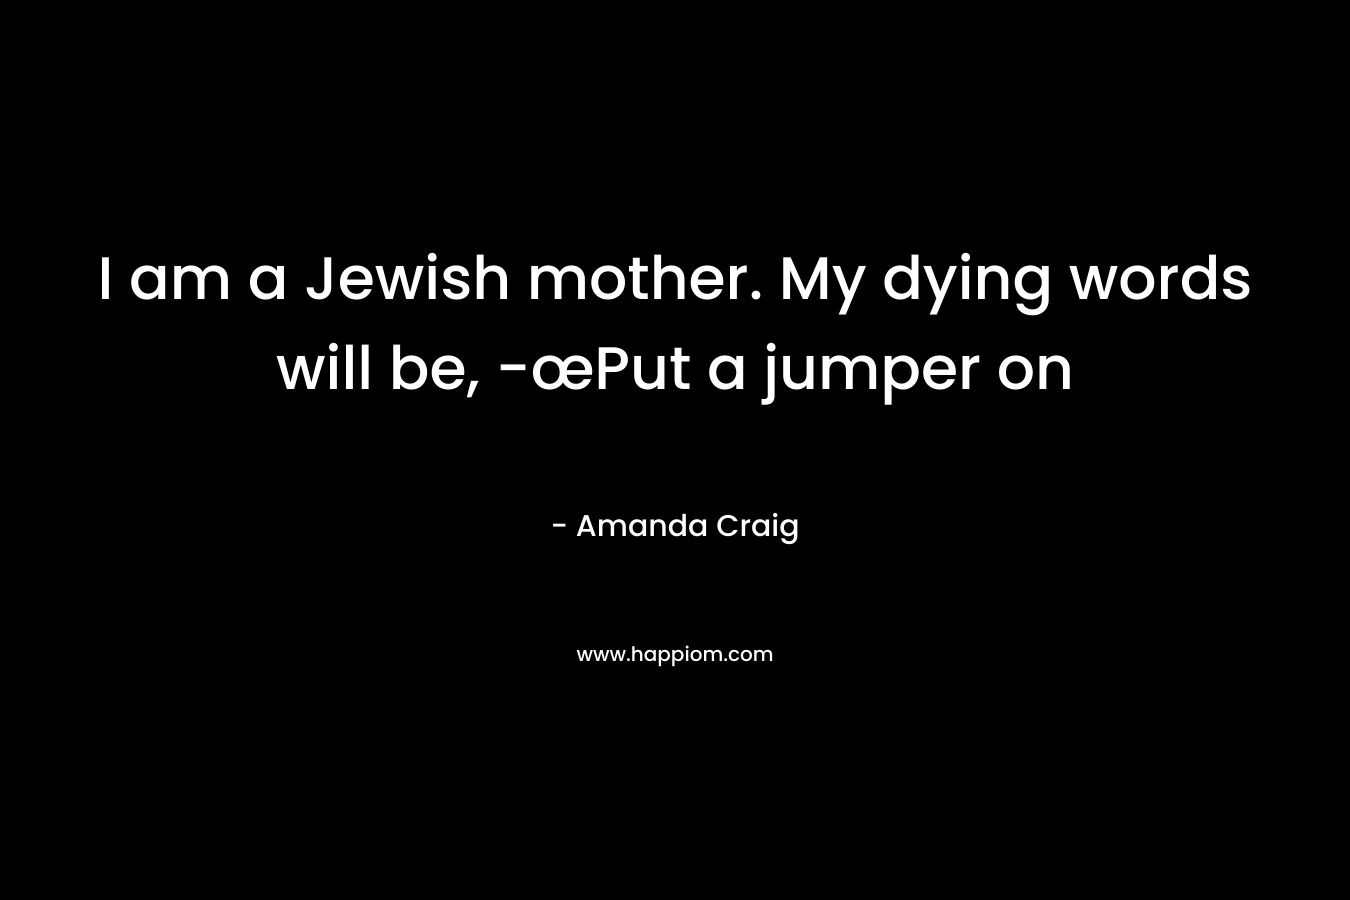 I am a Jewish mother. My dying words will be, -œPut a jumper on